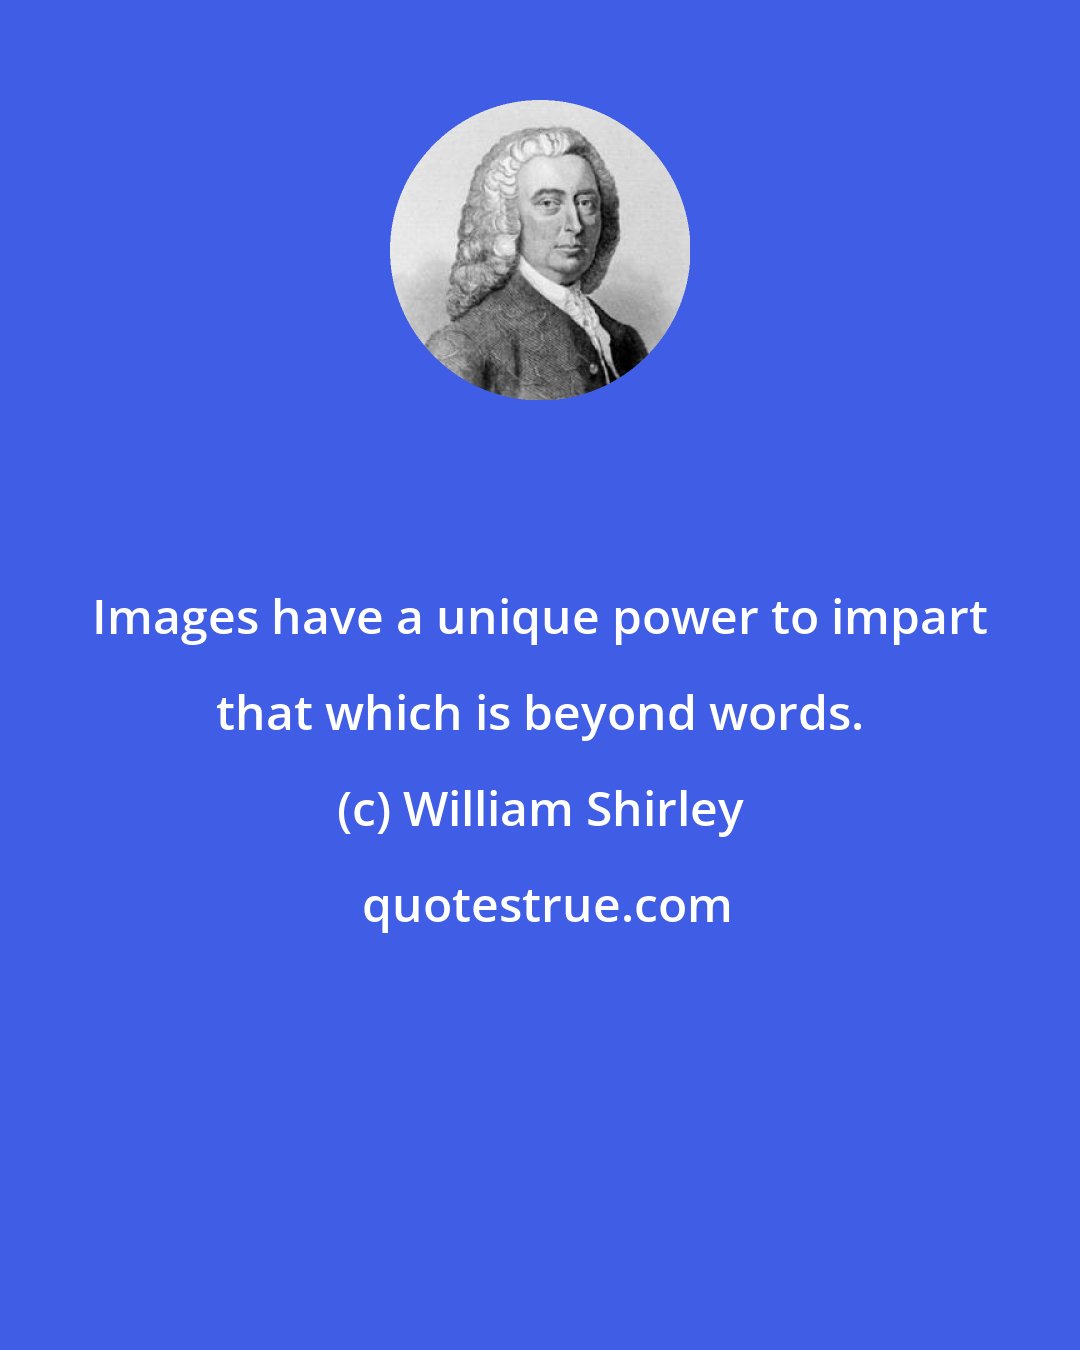 William Shirley: Images have a unique power to impart that which is beyond words.